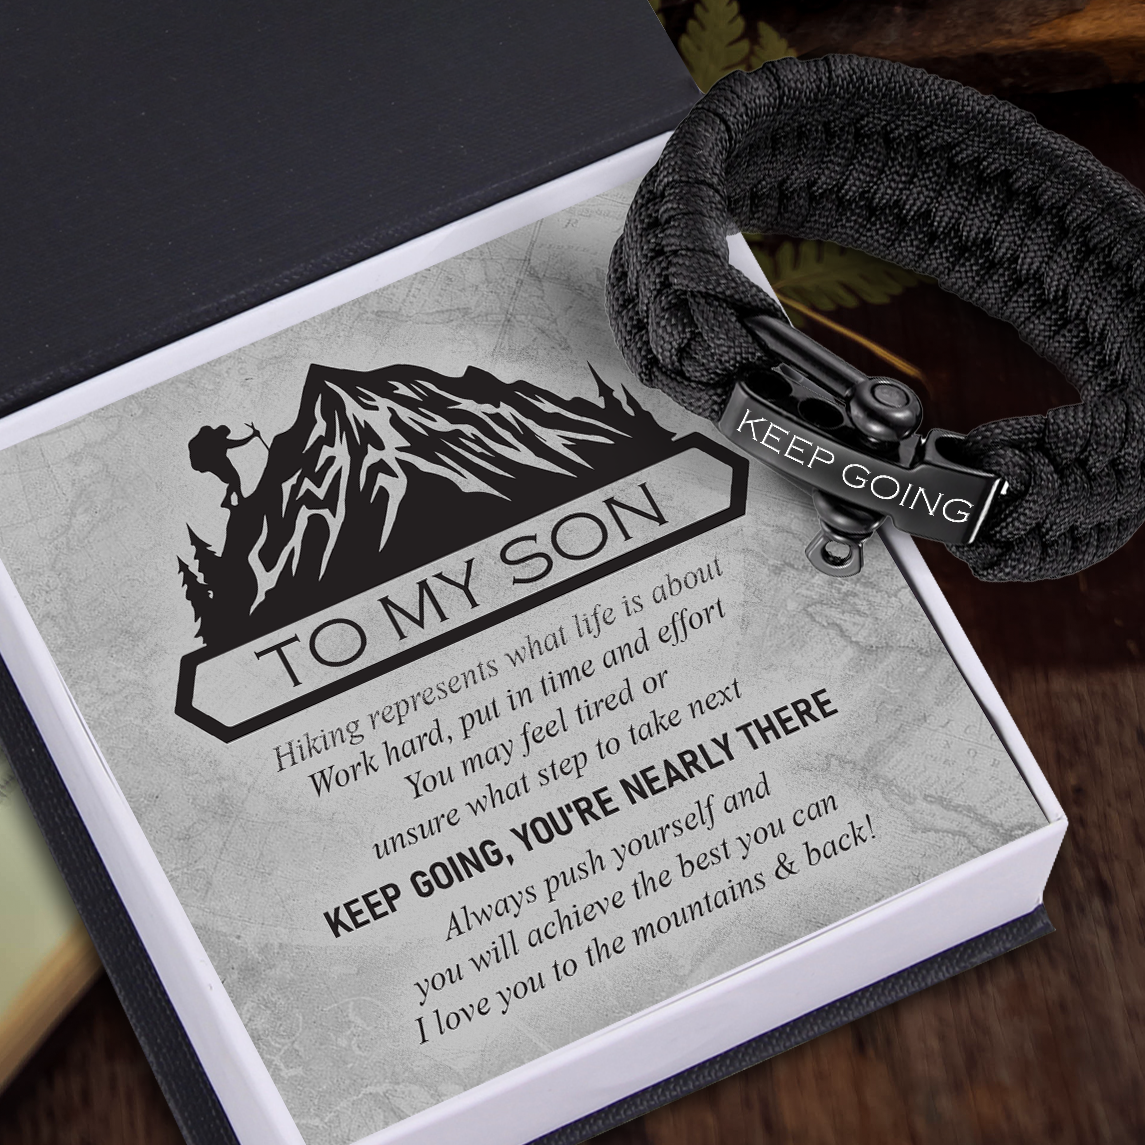 Paracord Rope Bracelet - Hiking - To My Son - Always Push Yourself And You Will Achieve The Best You Can - Ukgbxa16001